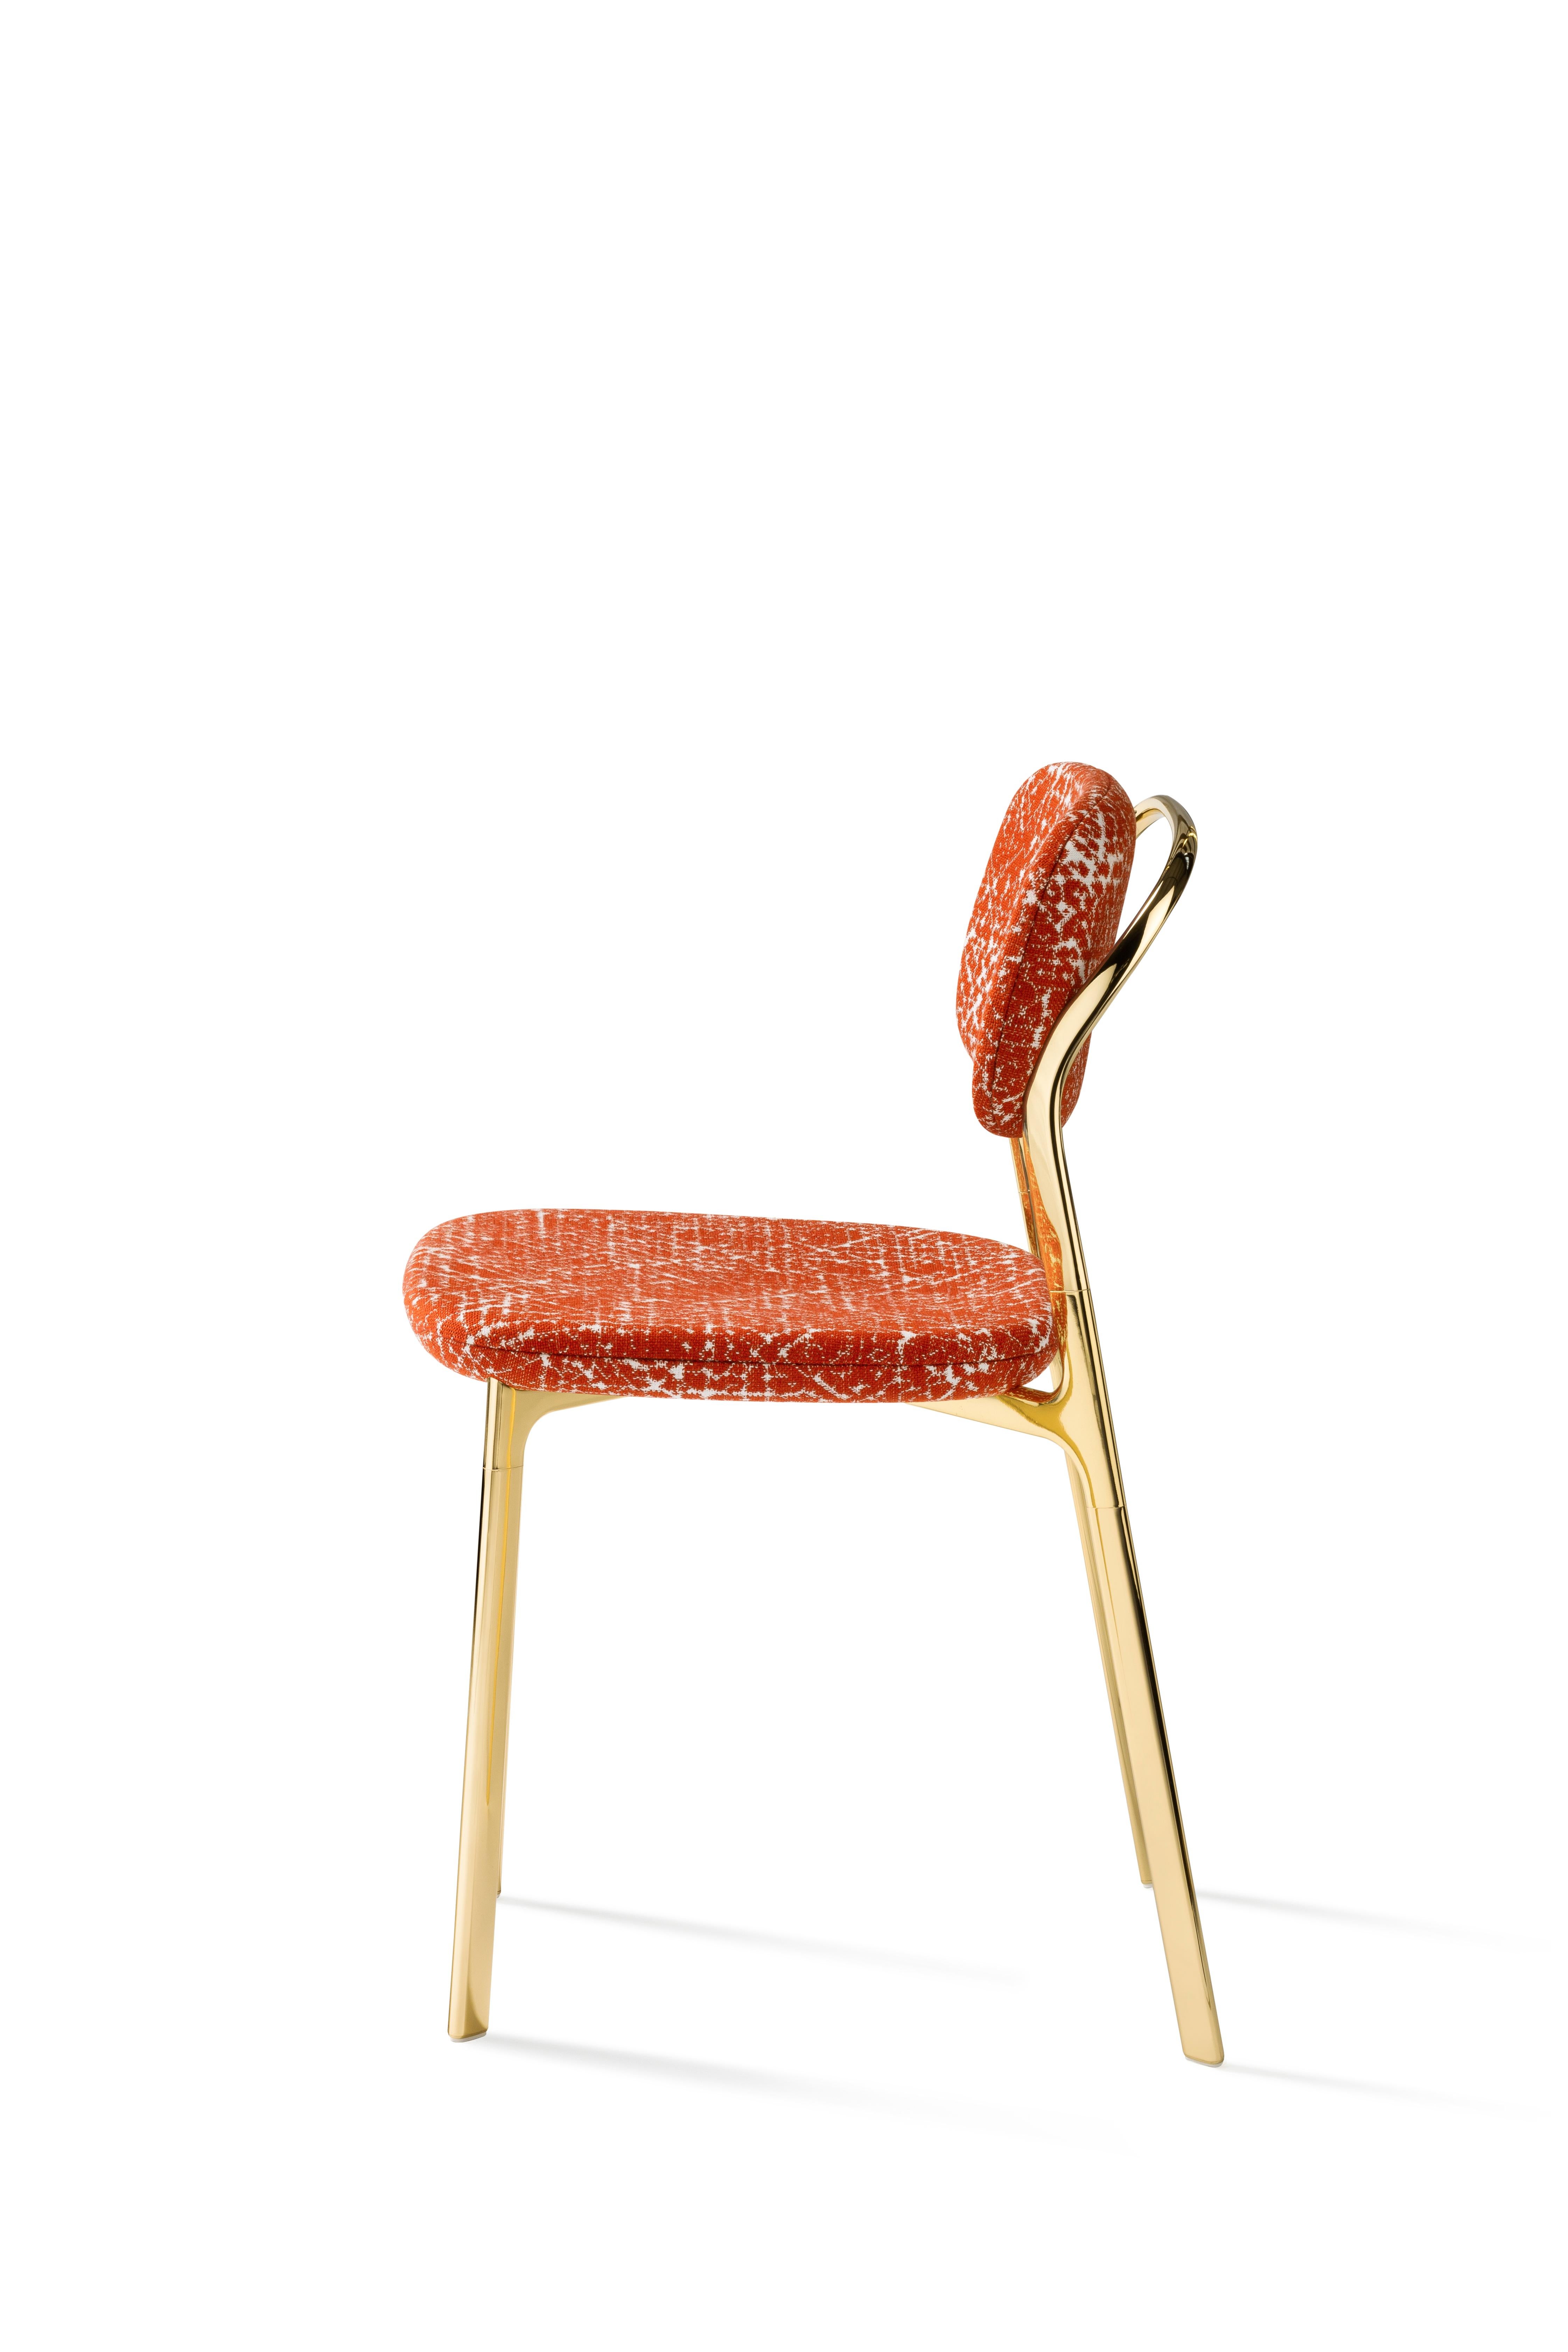 Coast Chair in Orange Fabric with Polished Brass by Branch In Excellent Condition For Sale In Brooklyn, NY